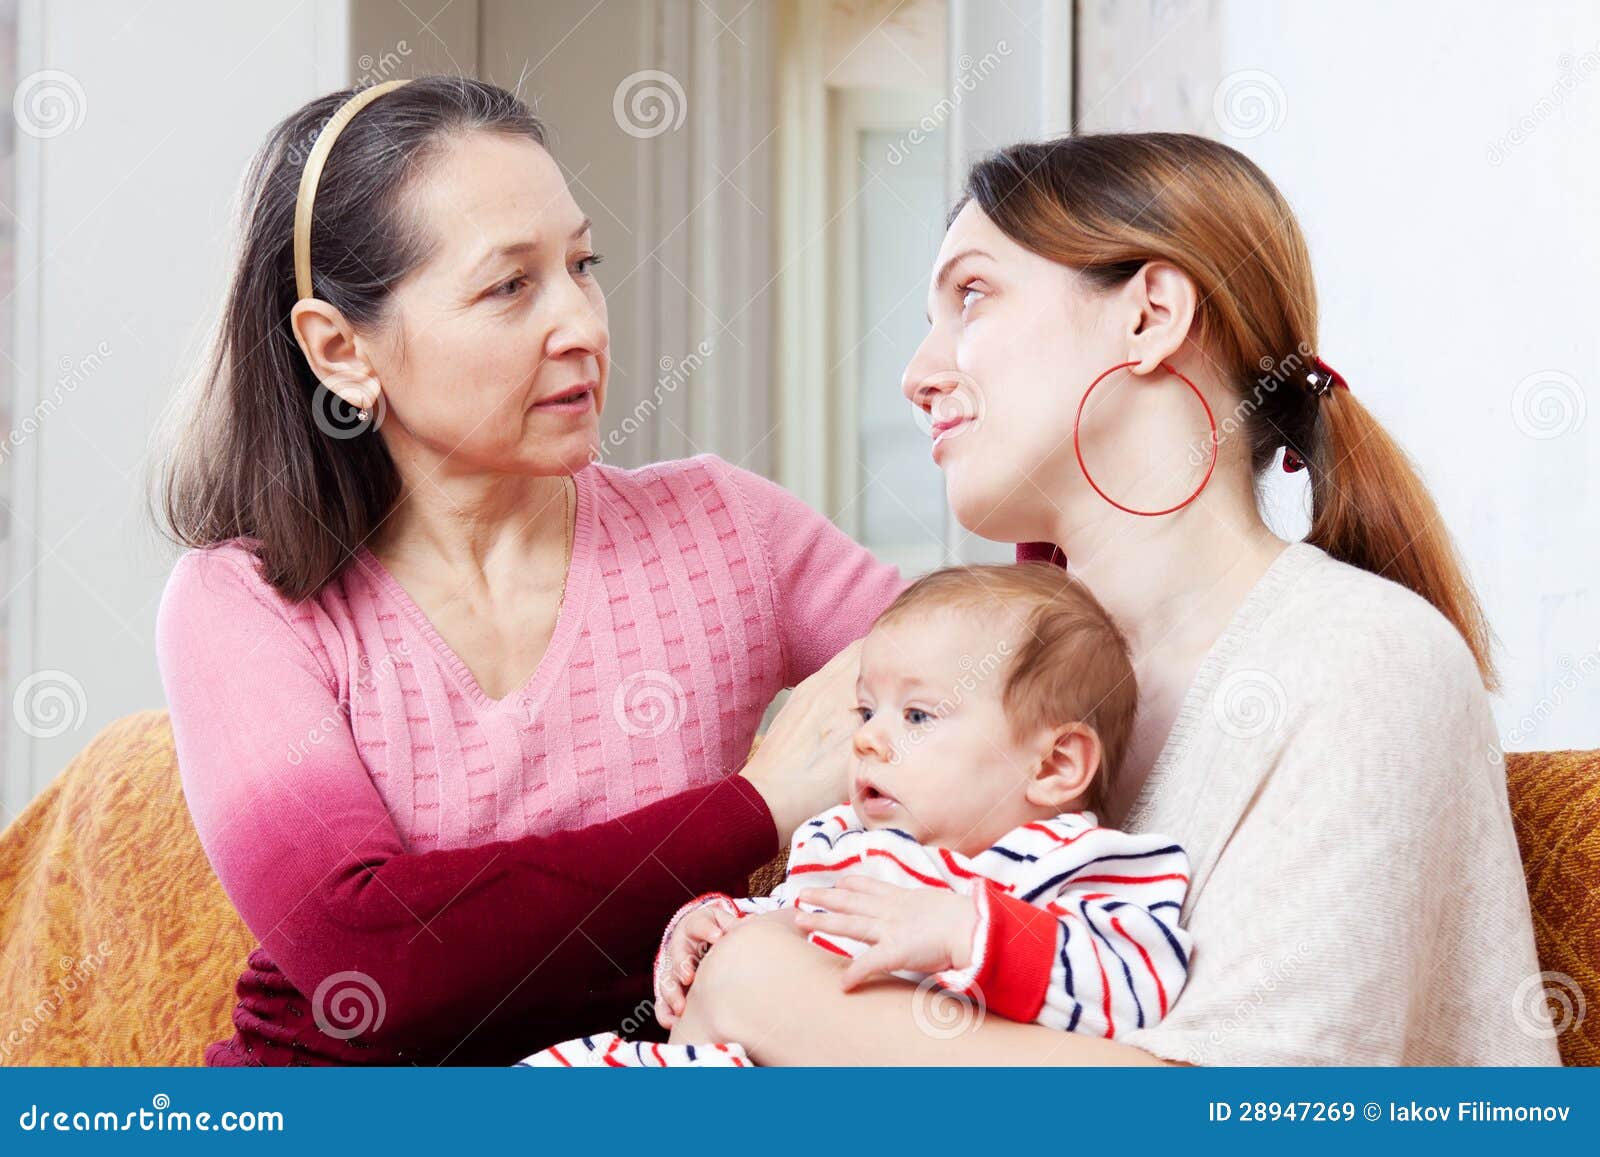 https://thumbs.dreamstime.com/z/mother-gives-solace-to-crying-adult-daughter-28947269.jpg